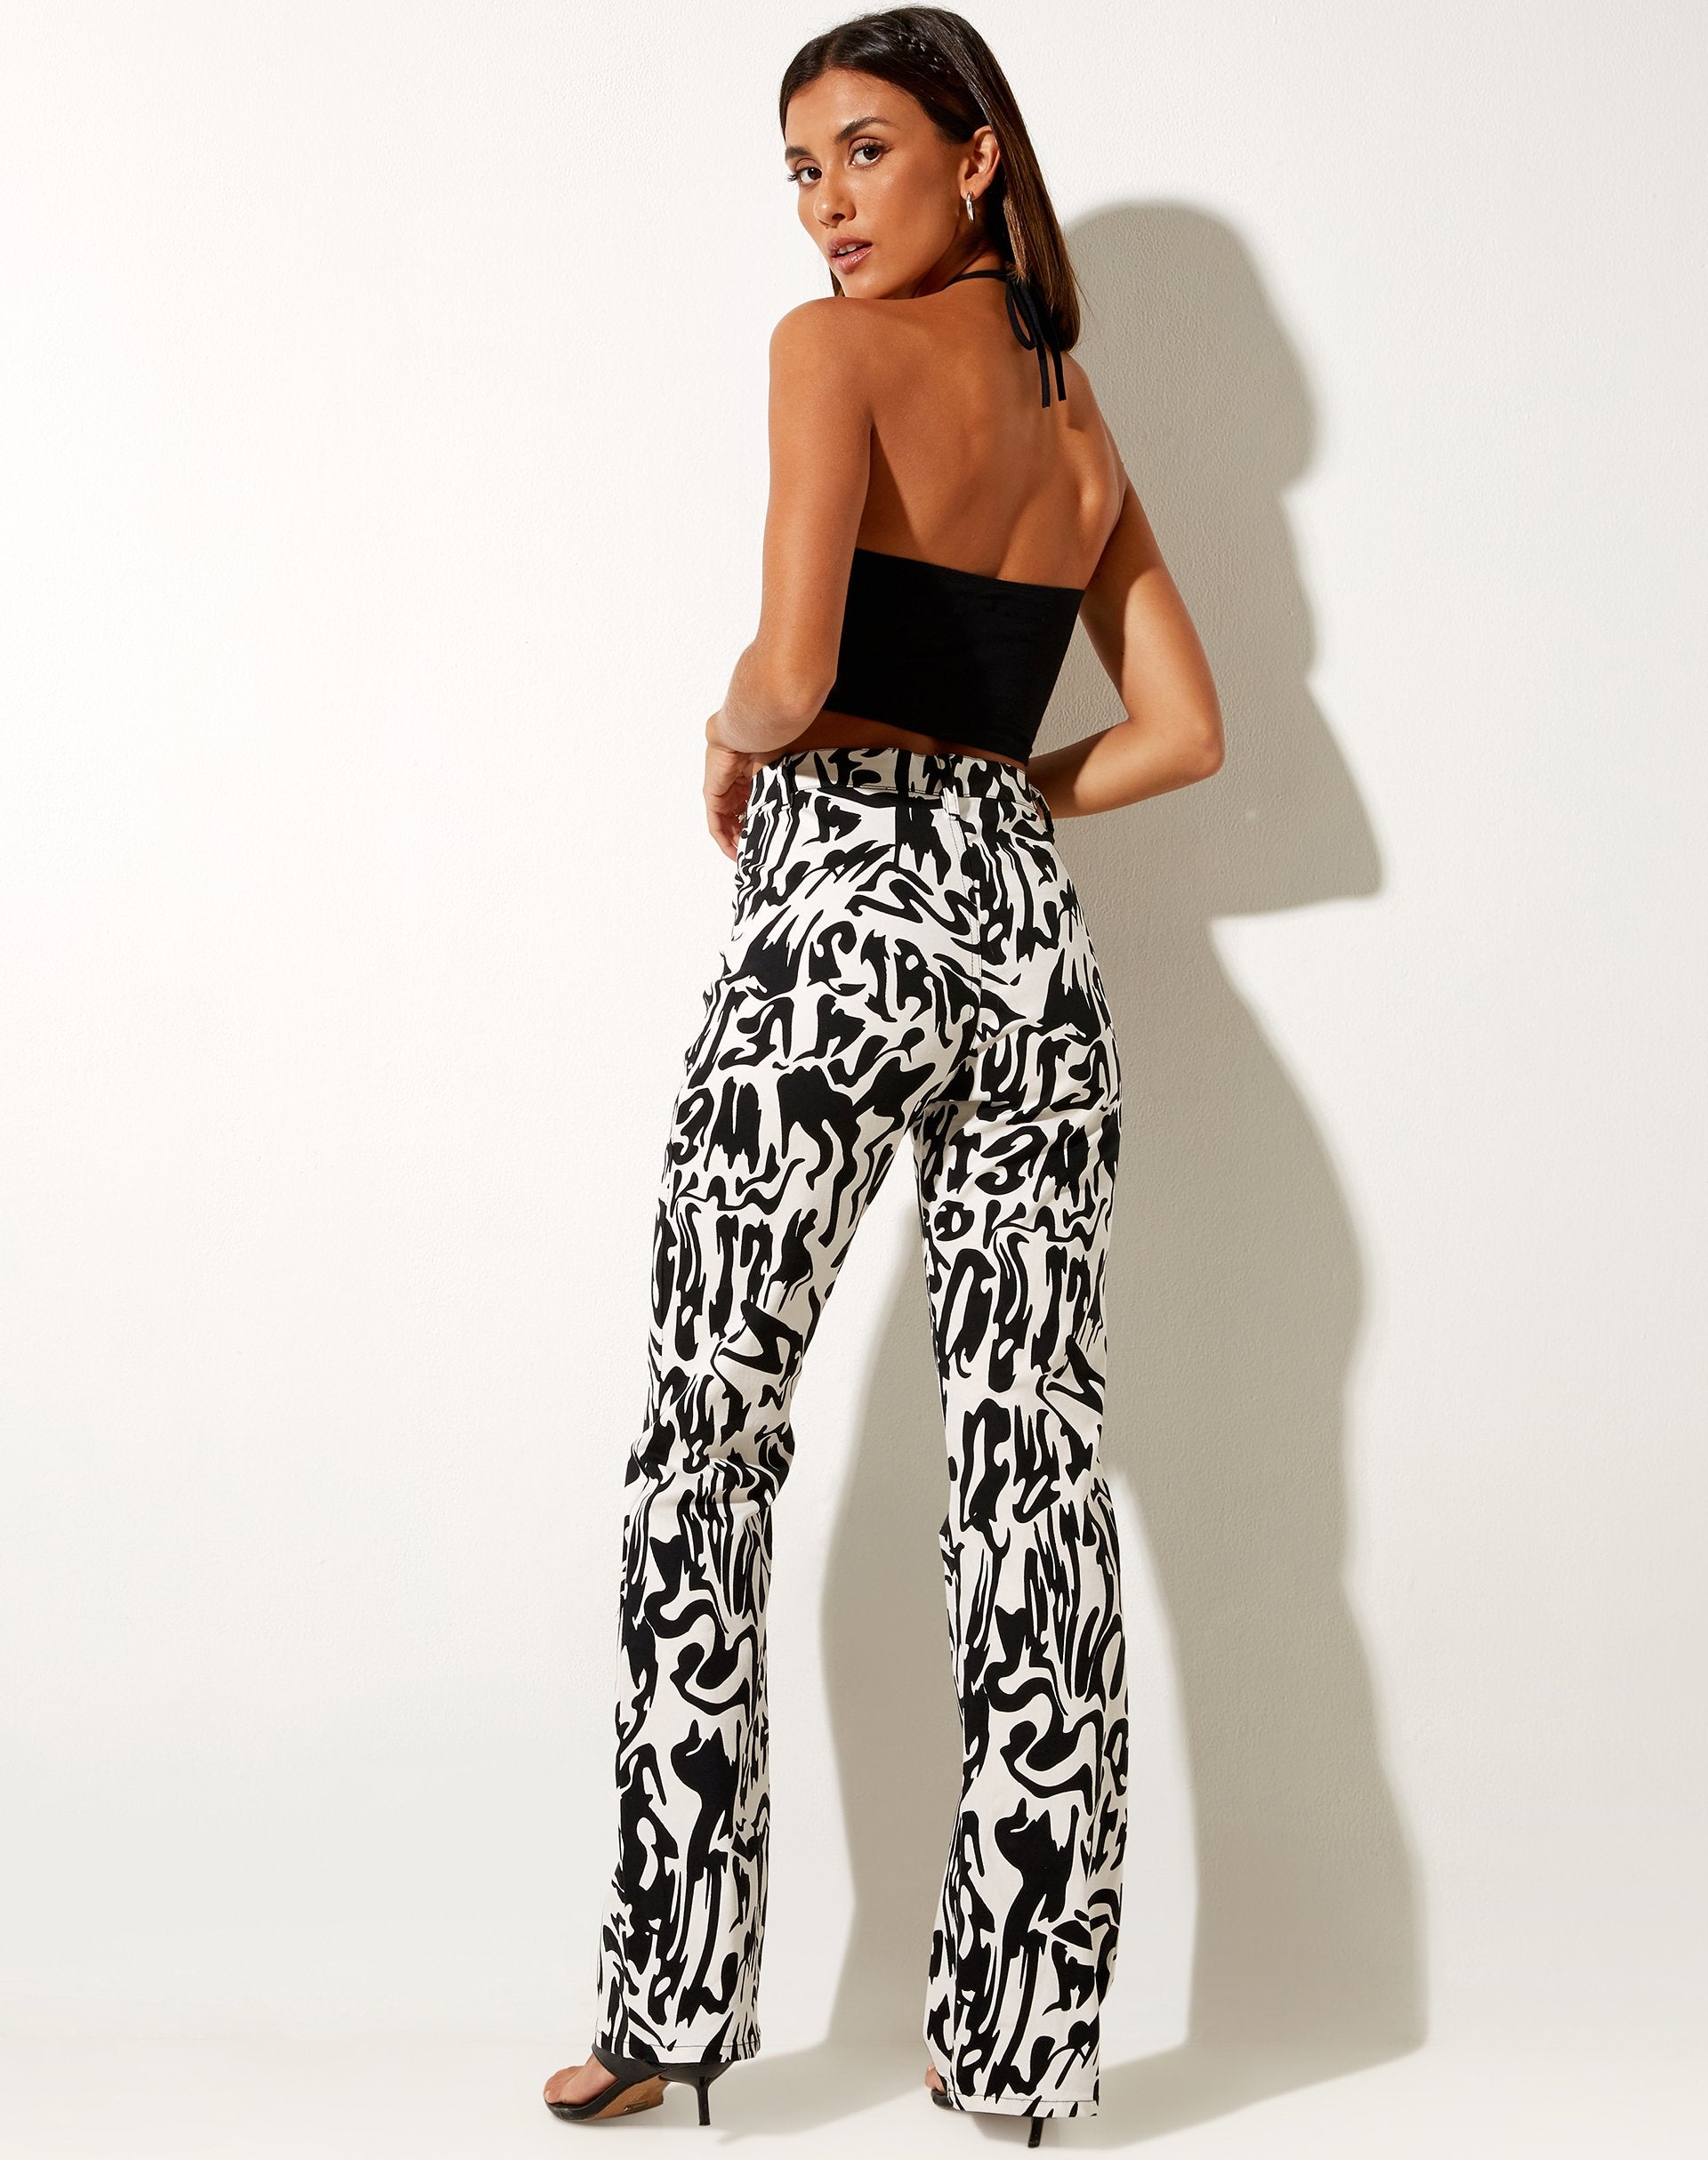 Image of Zoven Flare Trouser in Wrapped Gothic Large Black and White